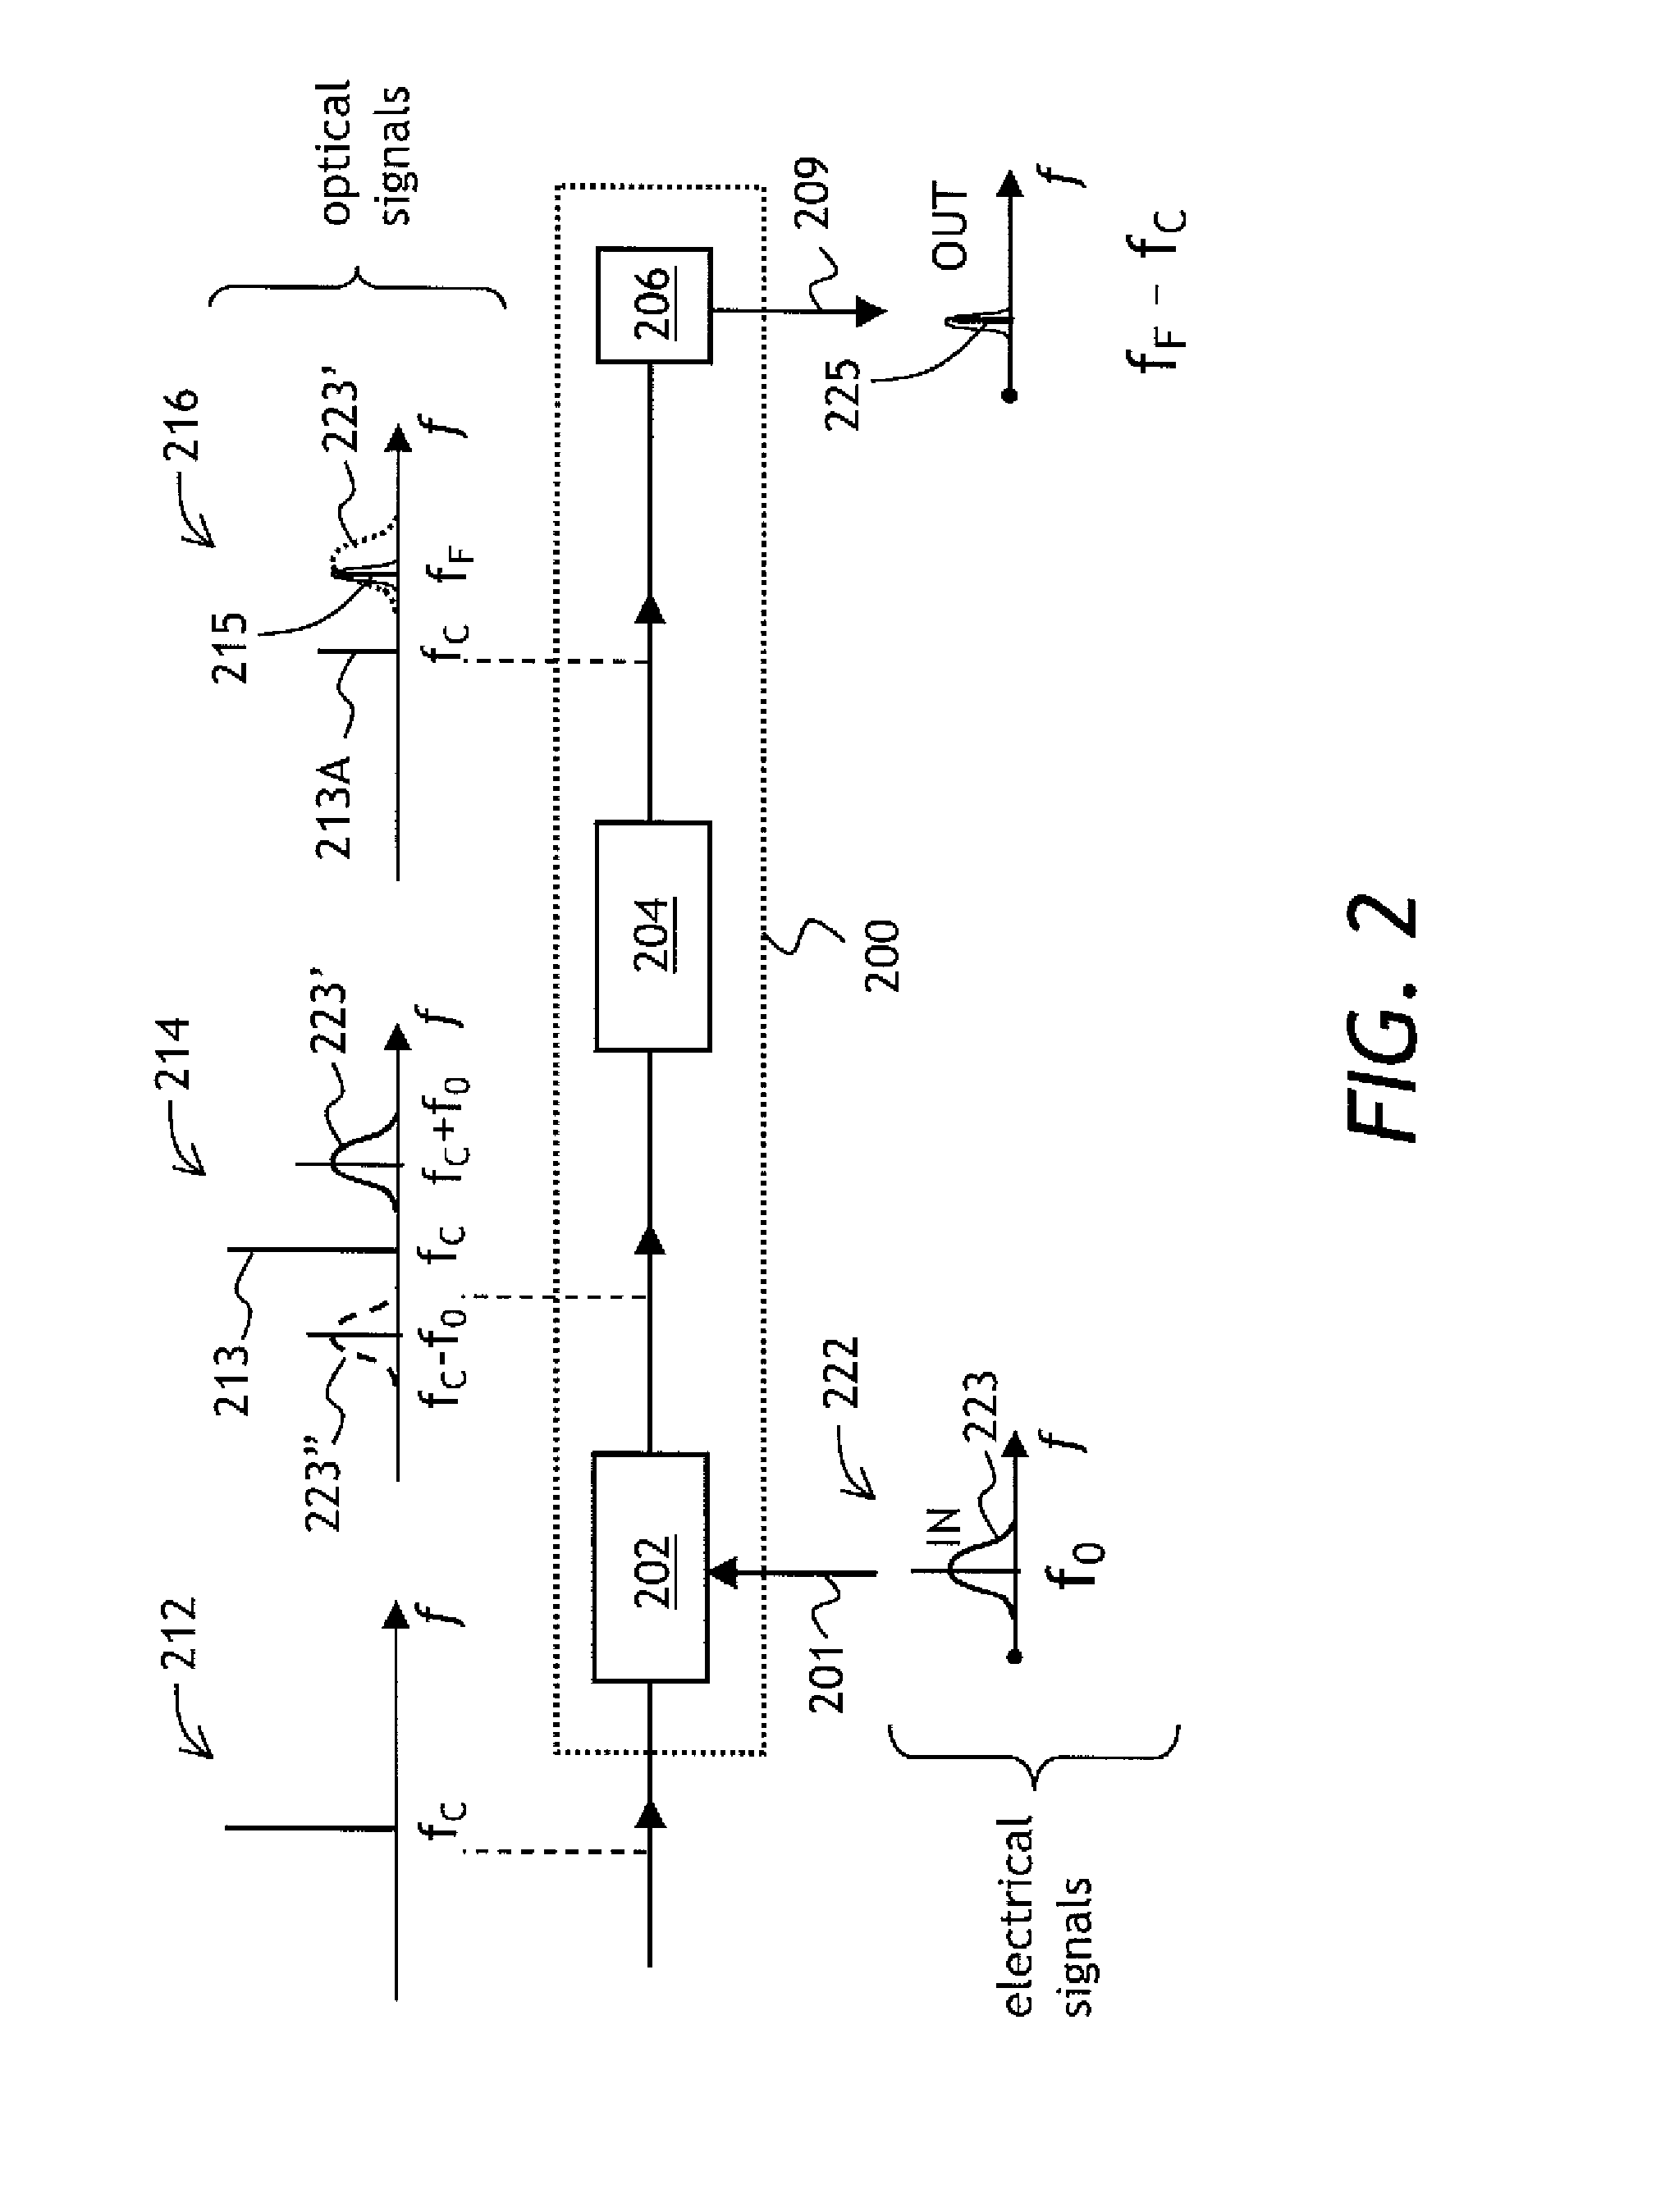 Photonic filtering of electrical signals